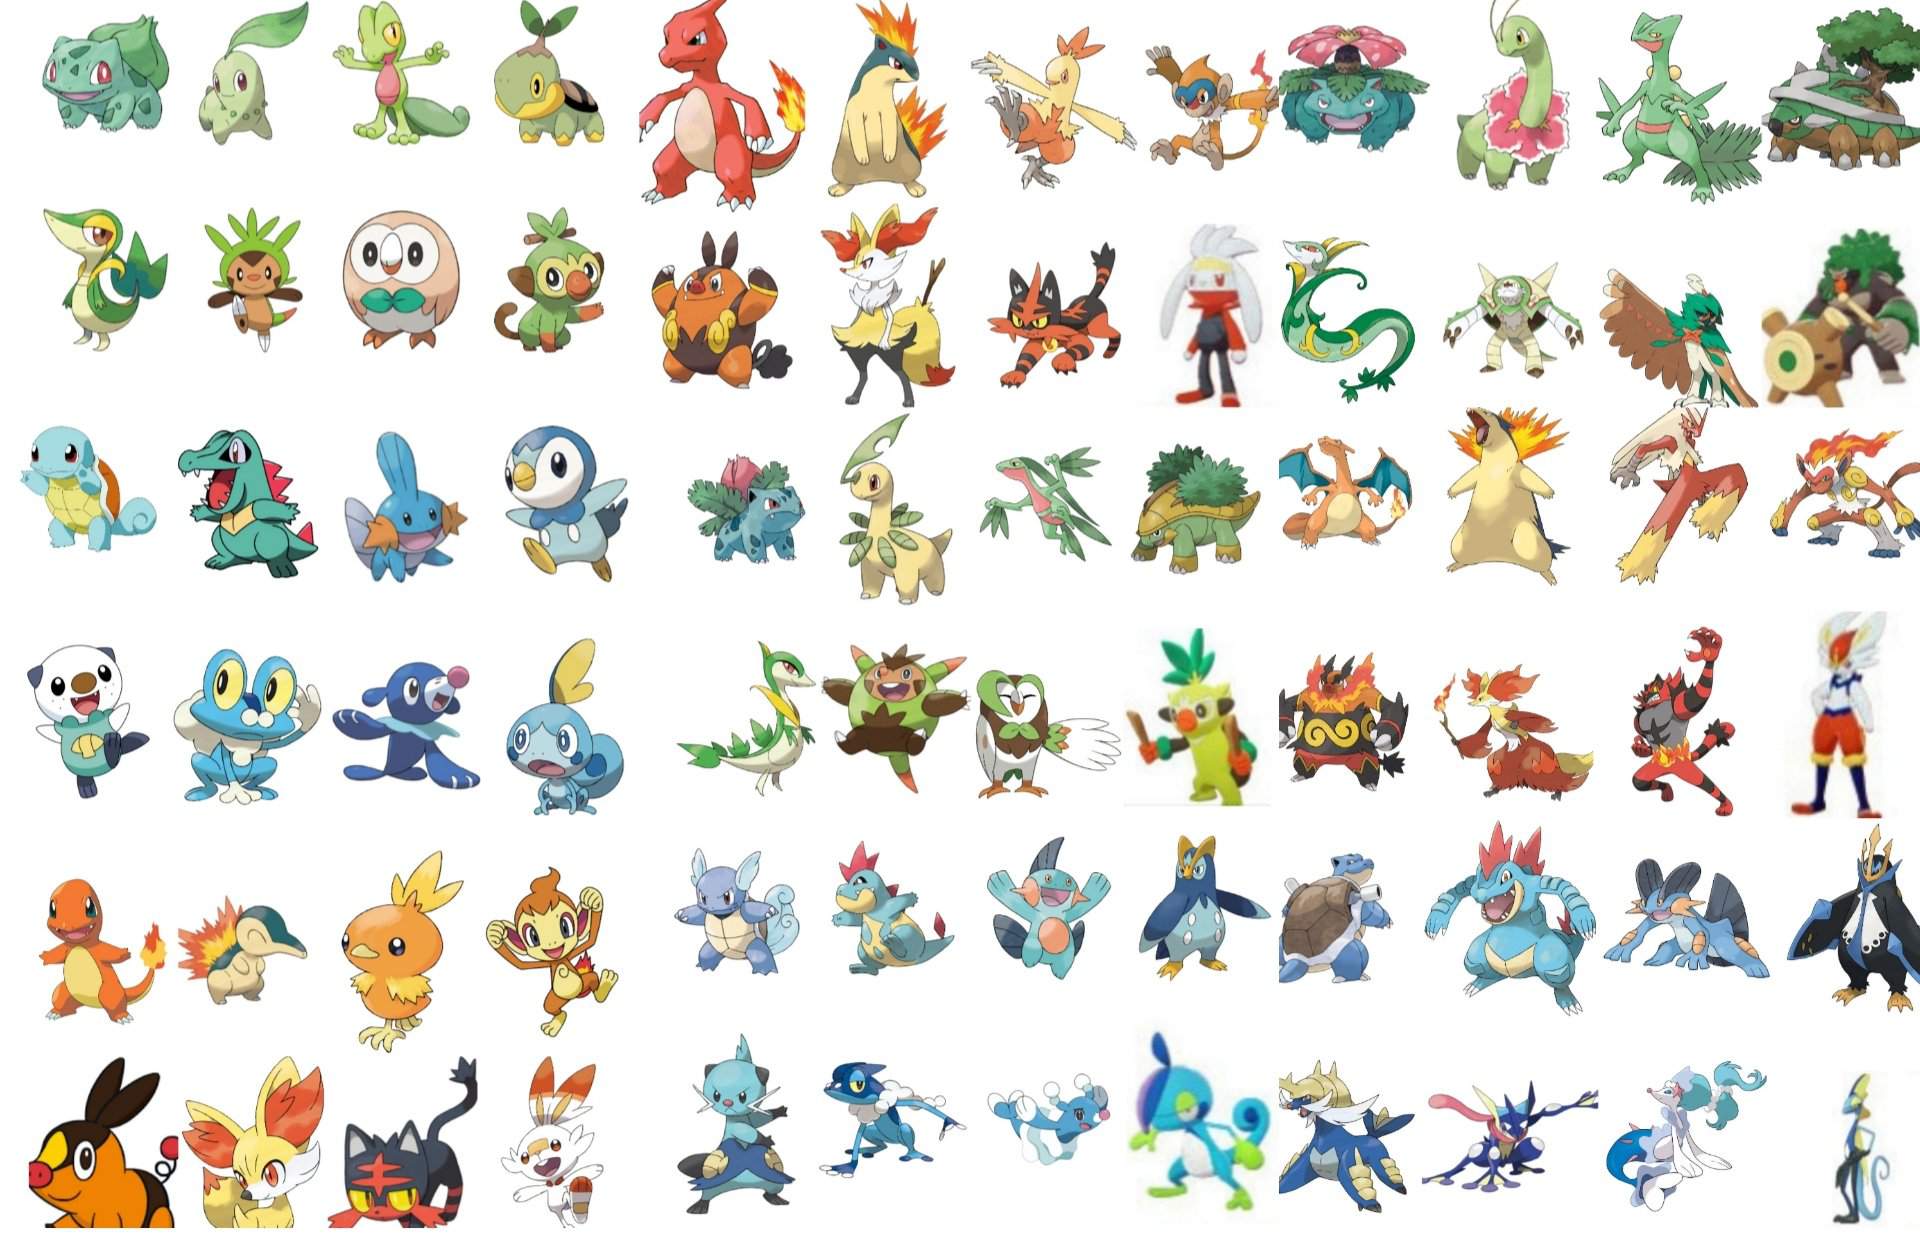 Sooo I Created This Collage Of All The Starter Pokémon And There Evolutions From Gen 1 To Gen 8